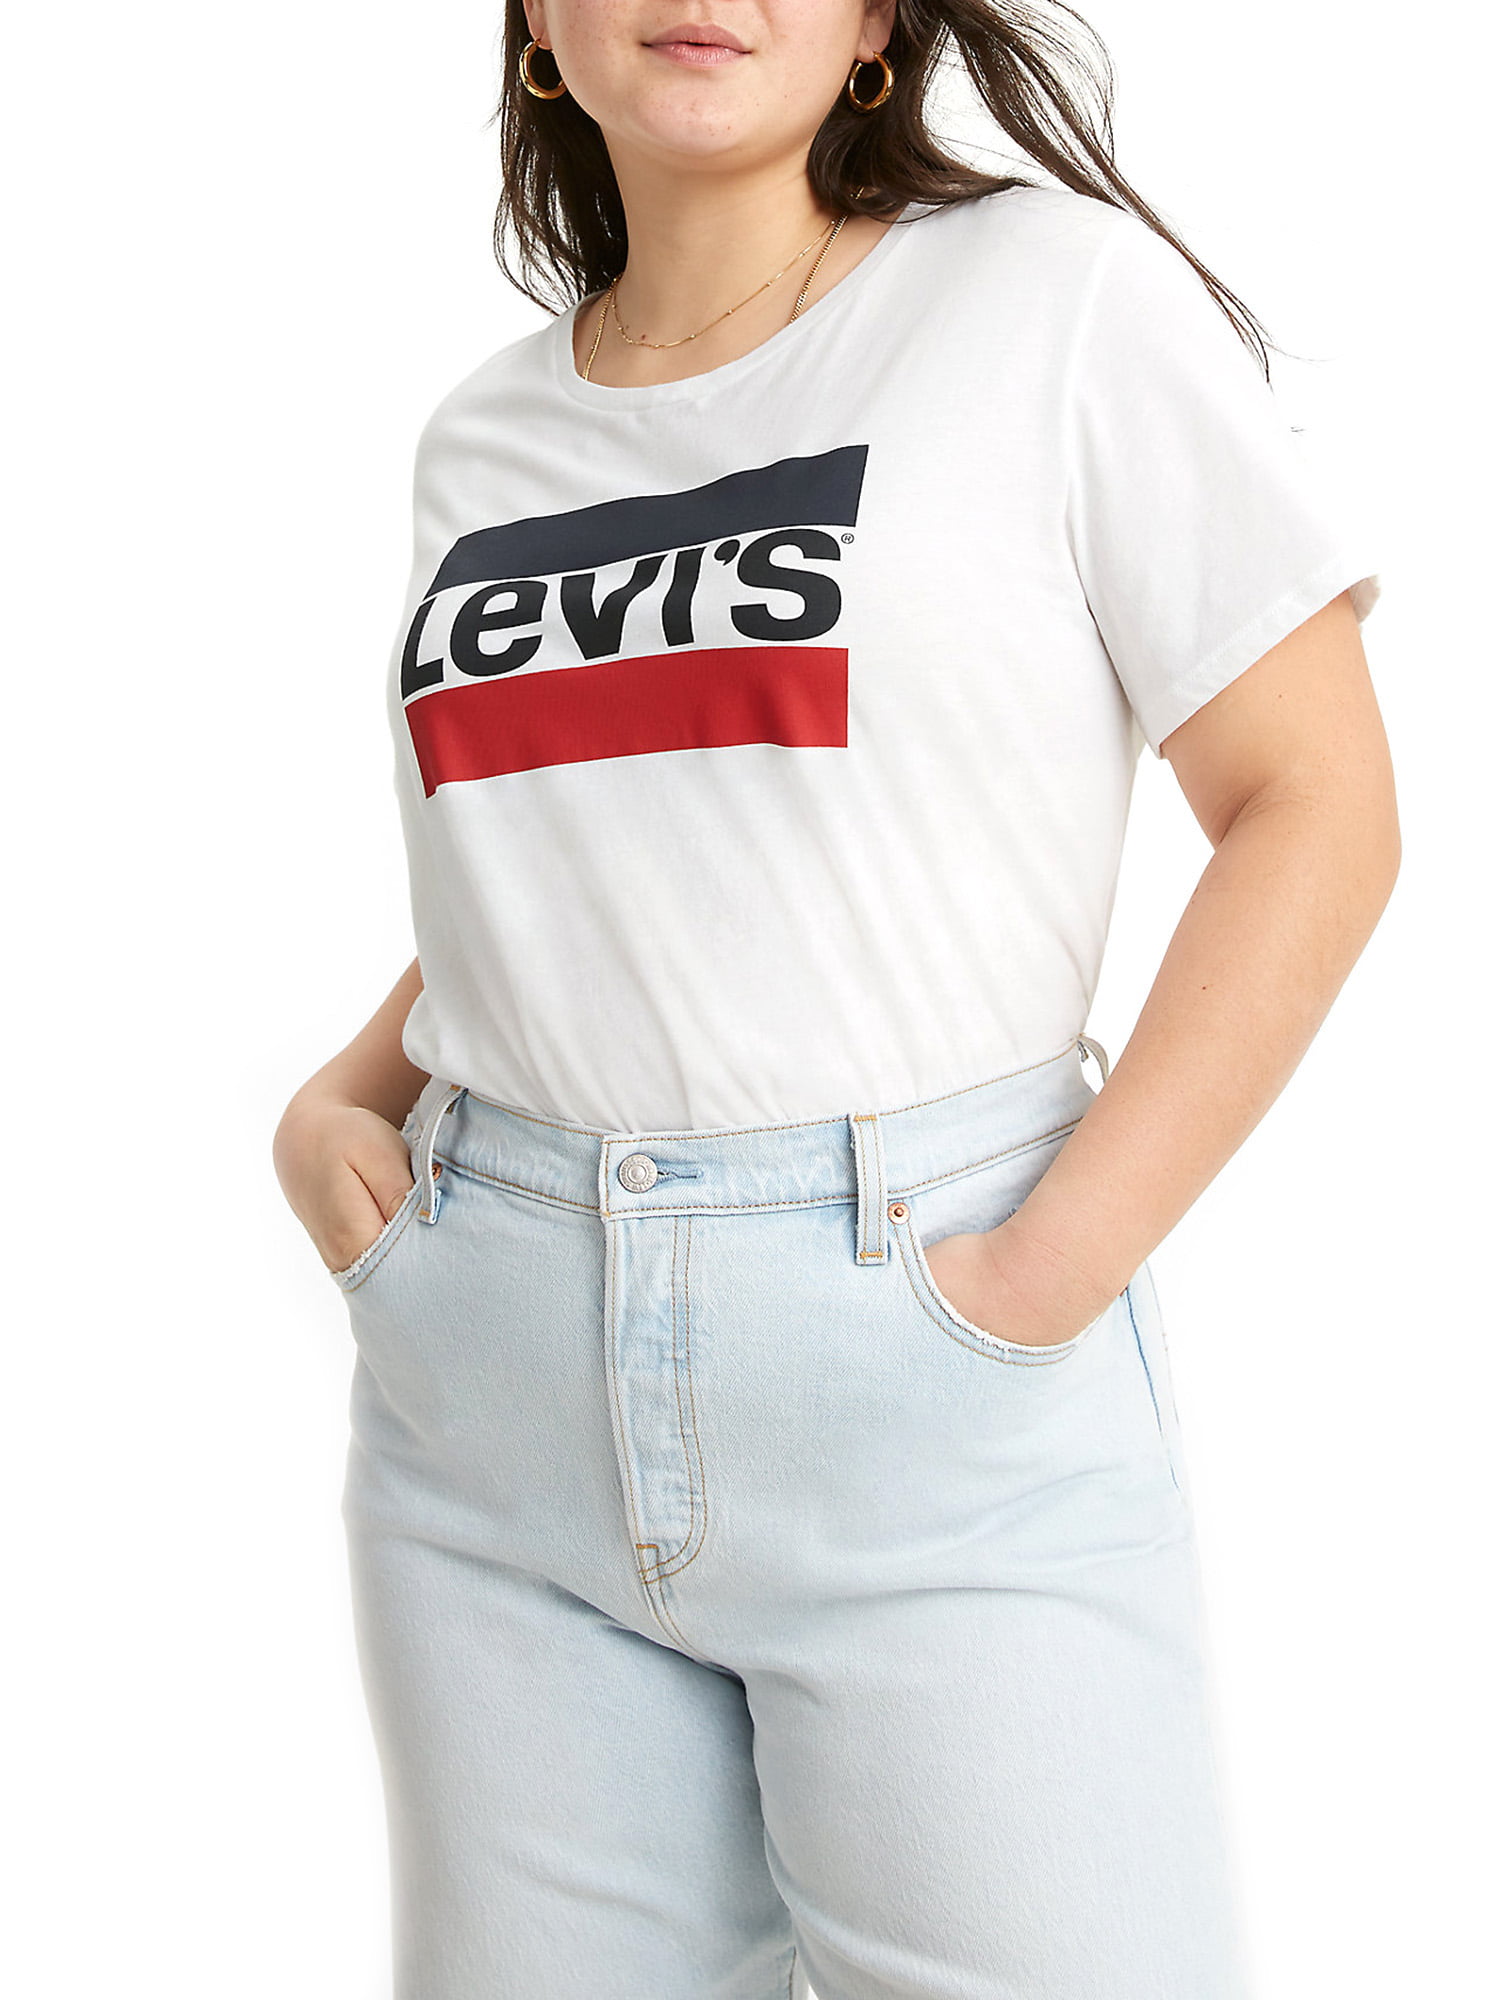 Buy Levis Womens Plus Size Perfect Graphic Short Sleeve T-Shirt Online at  Lowest Price in Ubuy Vietnam. 462808170